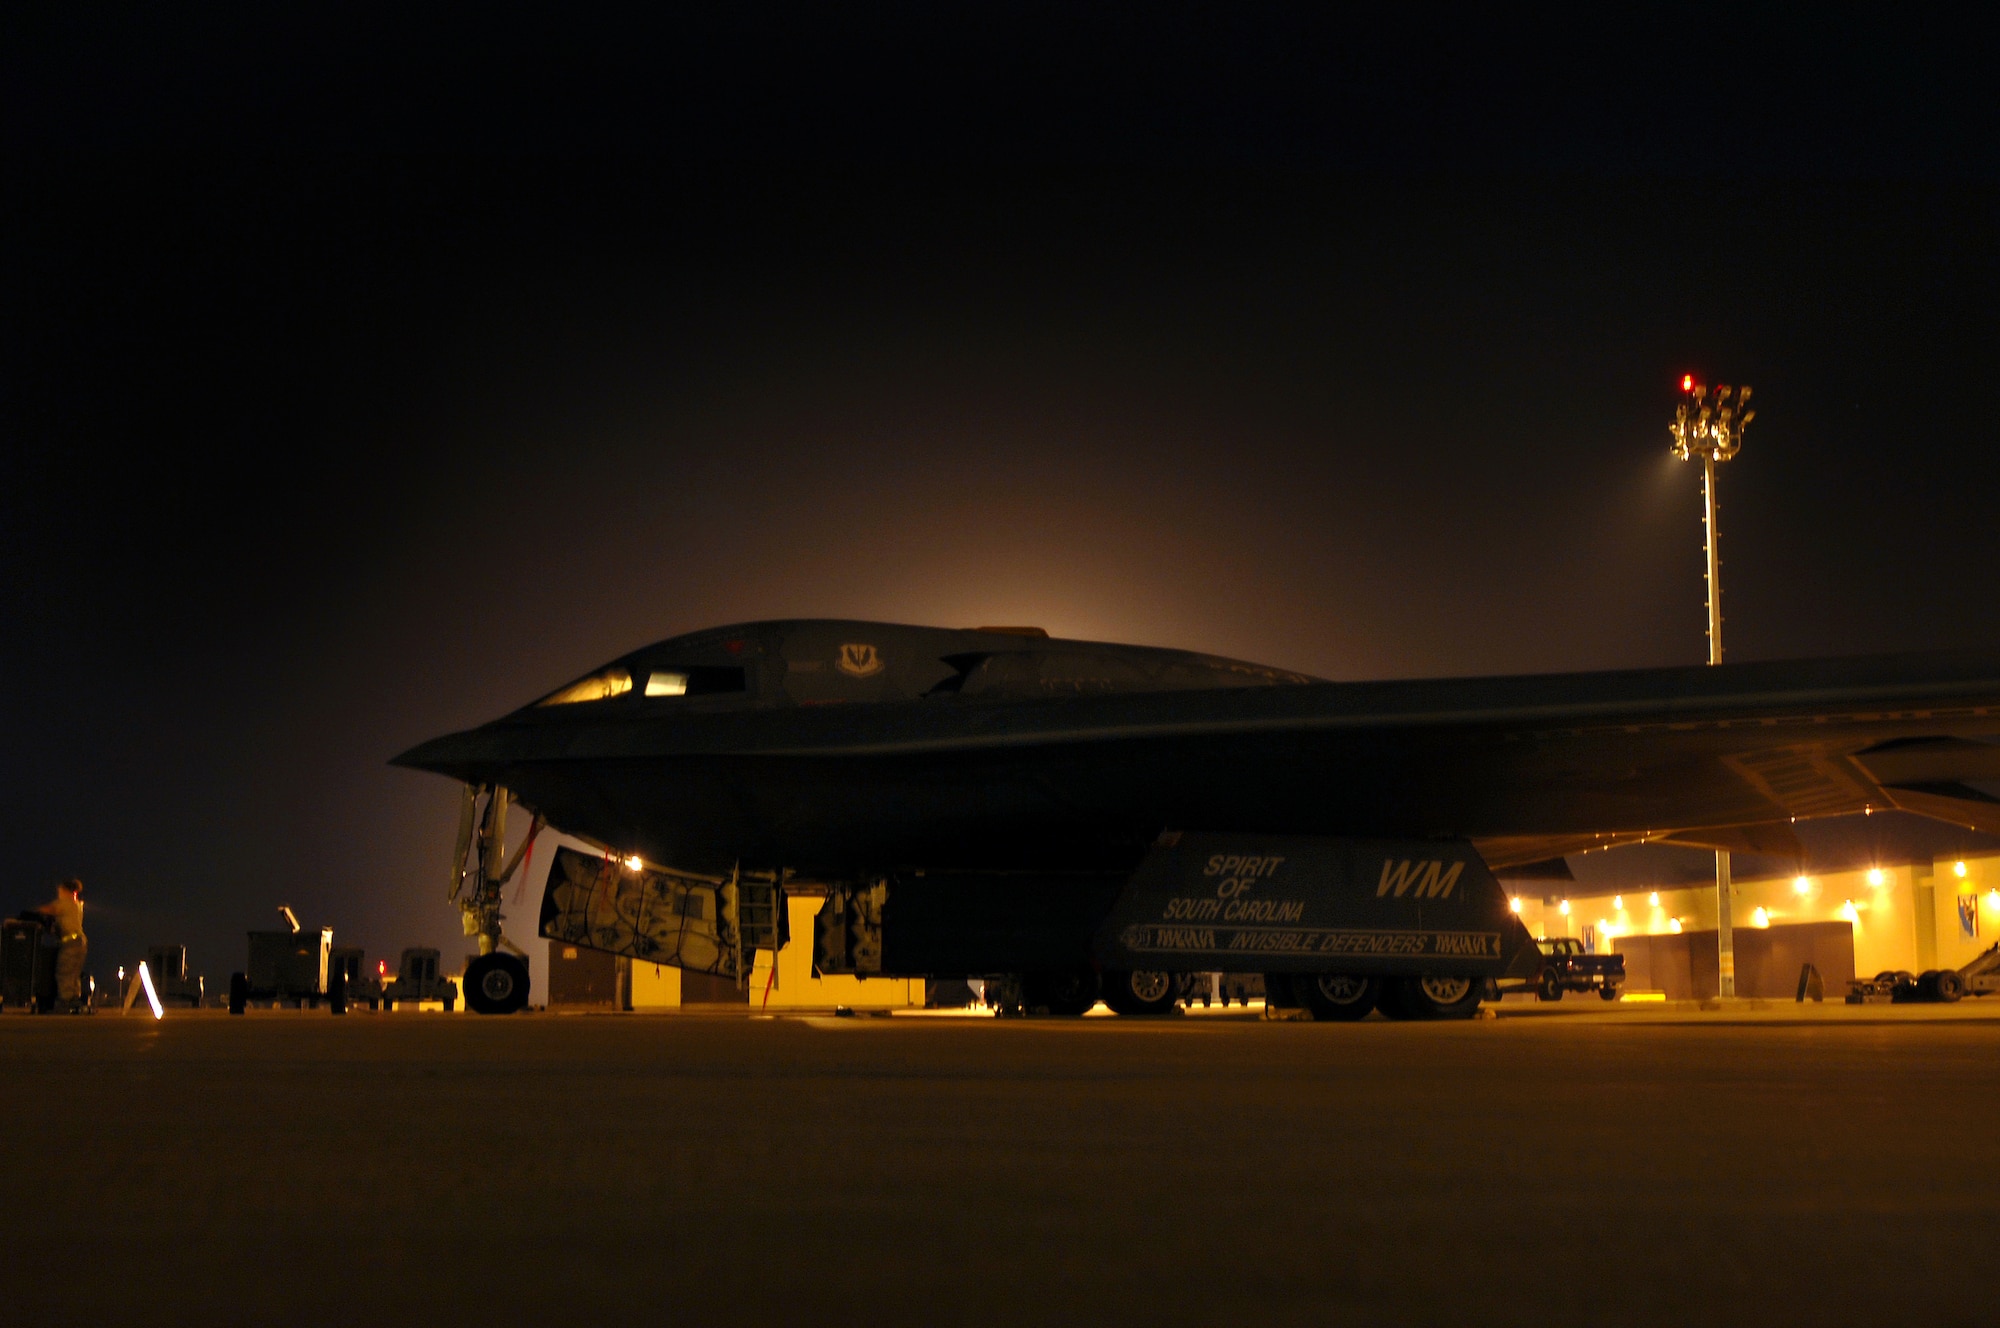 WHITEMAN AIR FORCE BASE, Mo. - Members of the 509th Aircraft Maintenance Squadron, prepare a B-2 Spirit, to be towed, August 27. The B-2 Spirit is scheduled for a wash, every 180 days and takes one to two days to complete. (U.S. Air Force photo/Senior Airman Kenny Holston)